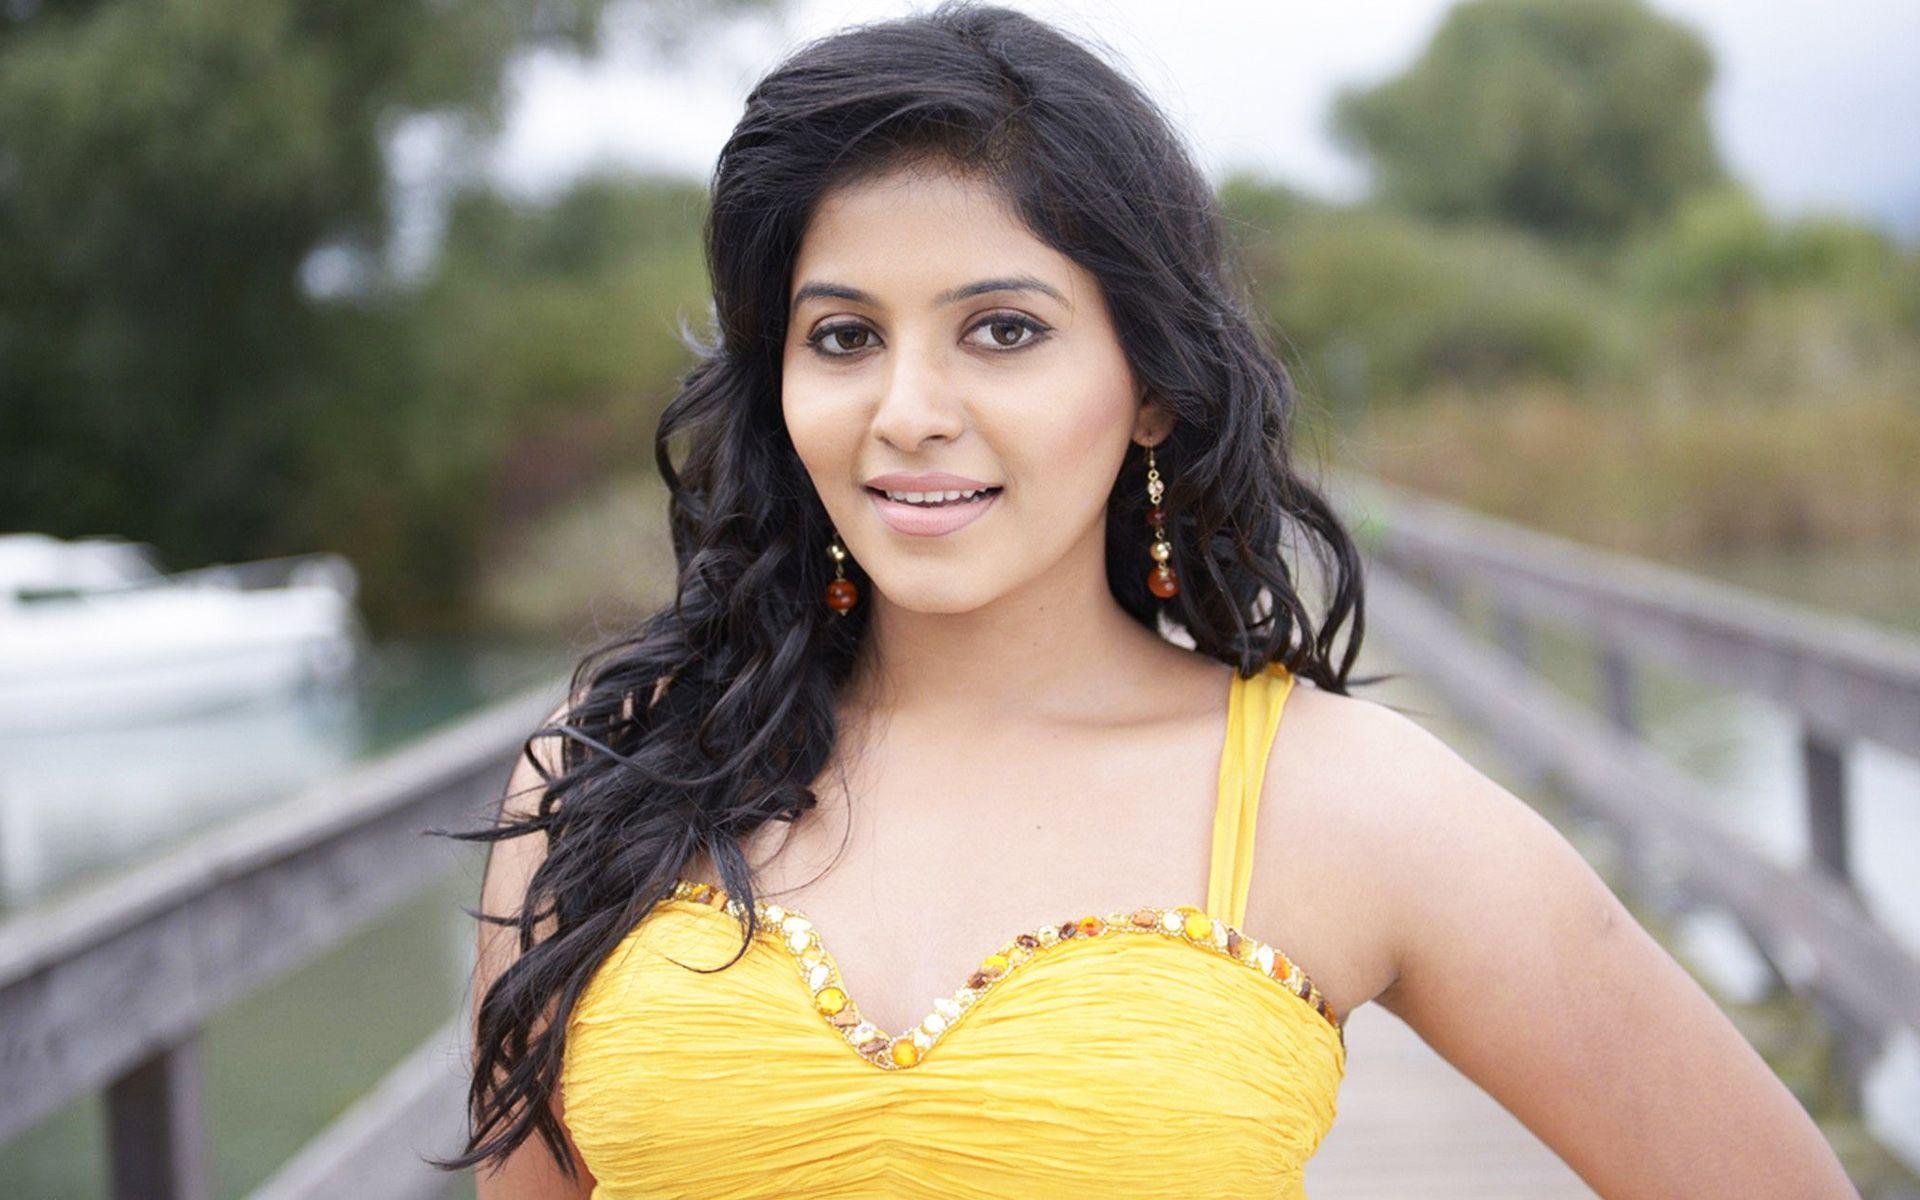 Tamil Actress Sweet Anjali HD Wallpaper And Photo Gallery